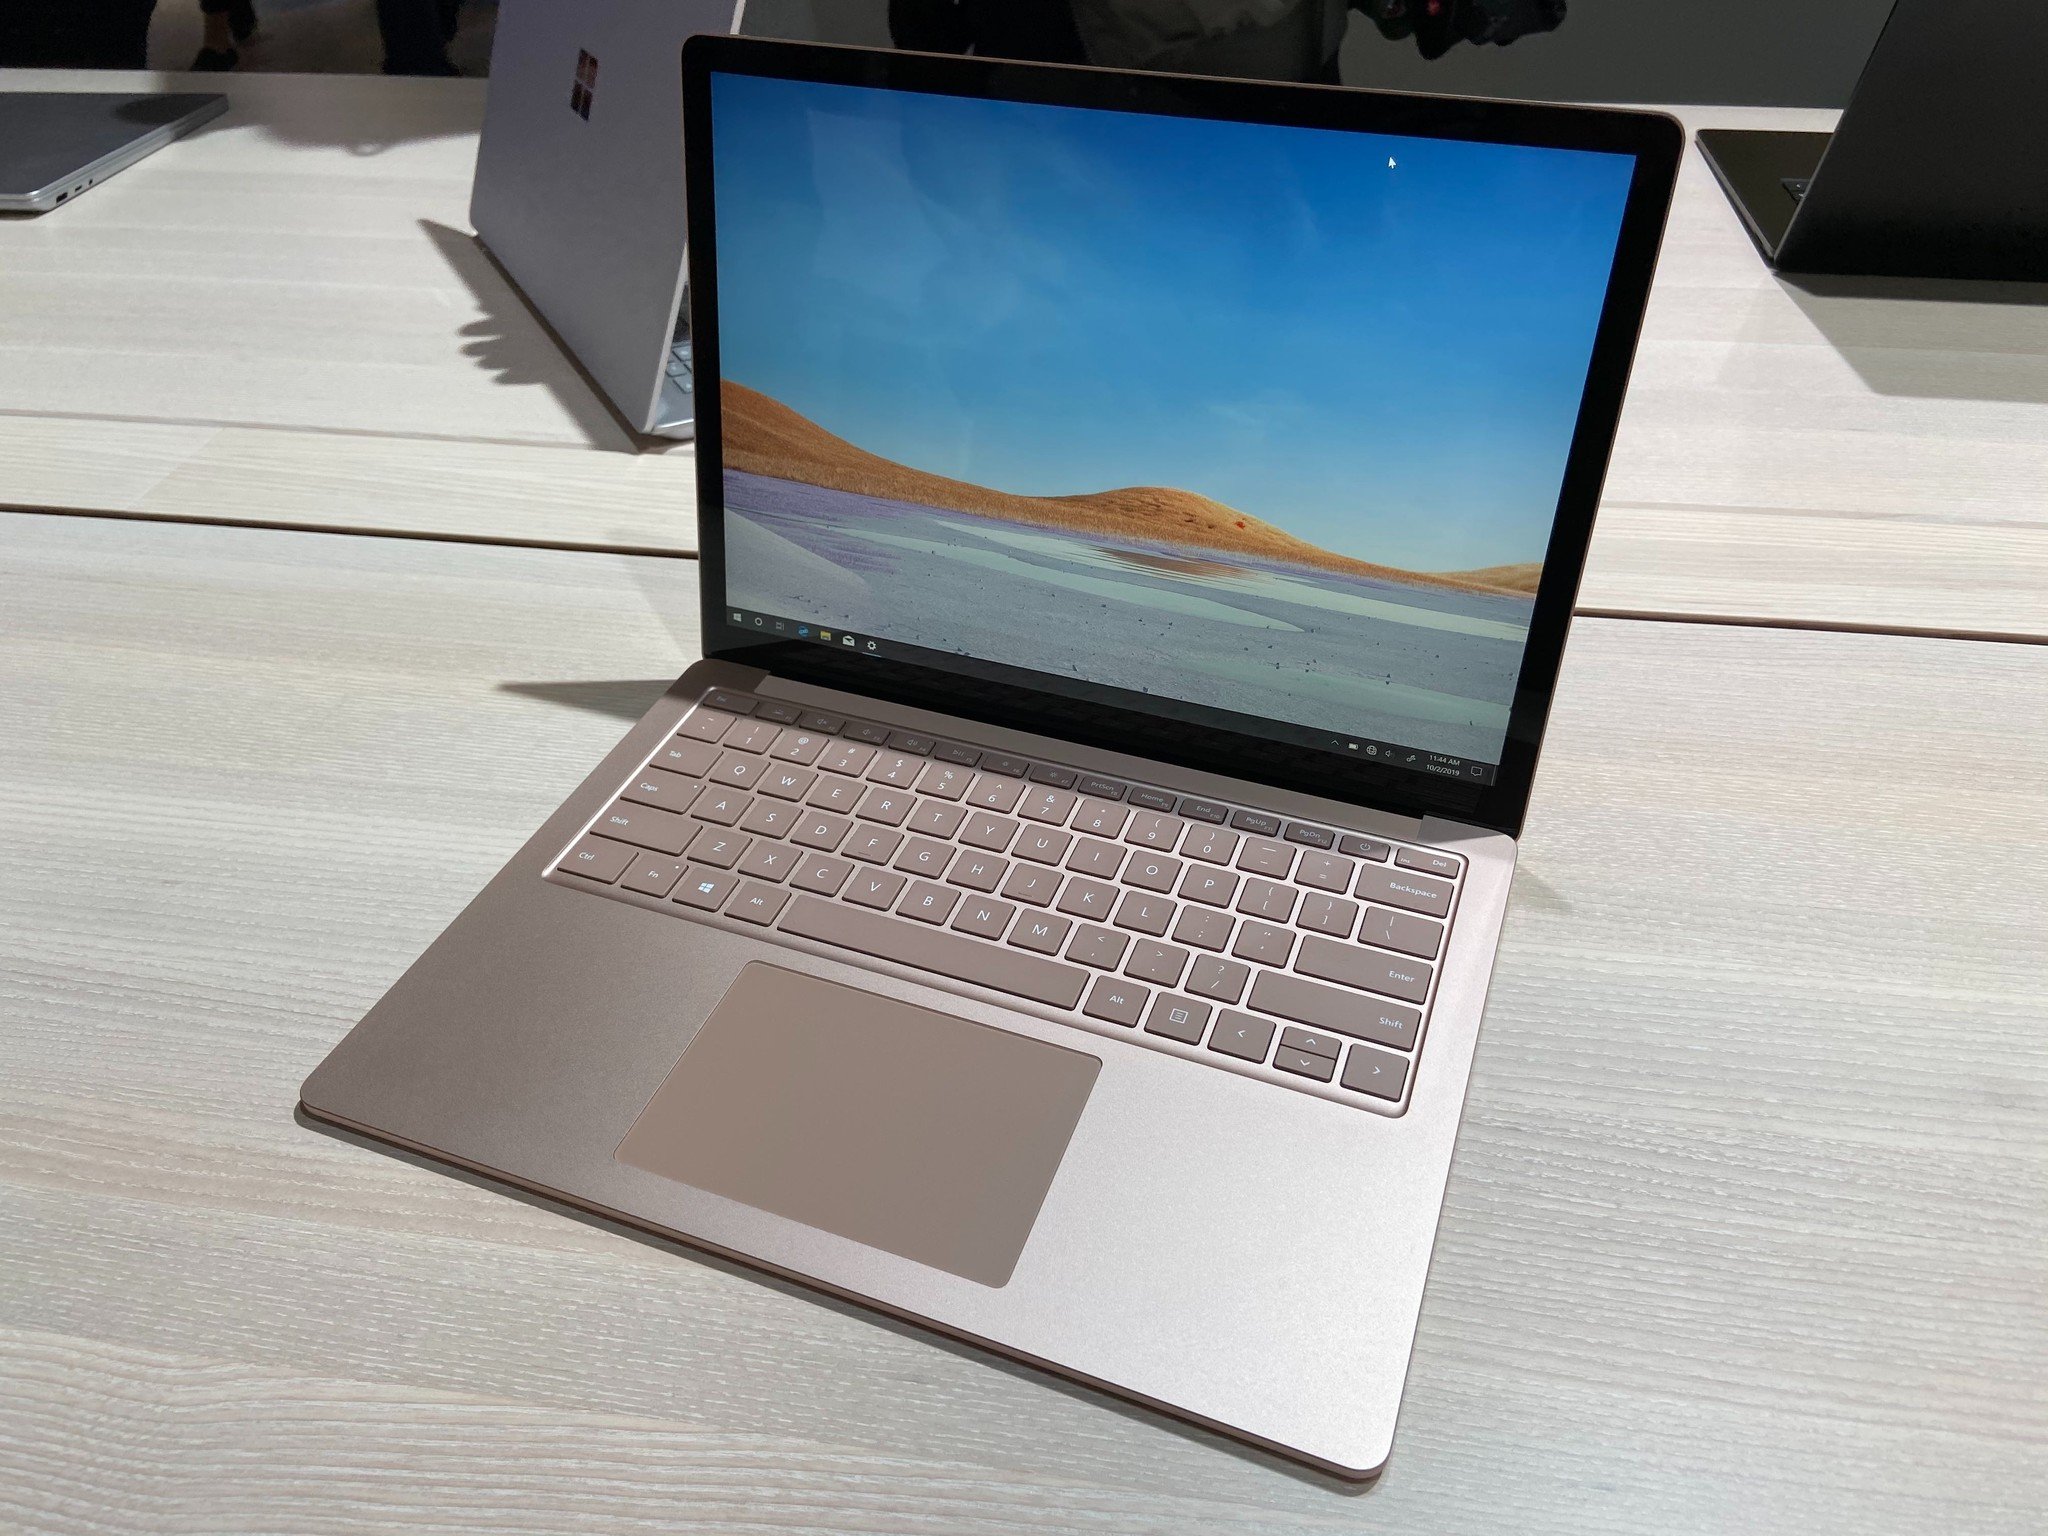 Where's the best place to buy Microsoft's Surface Laptop 3? - Windows